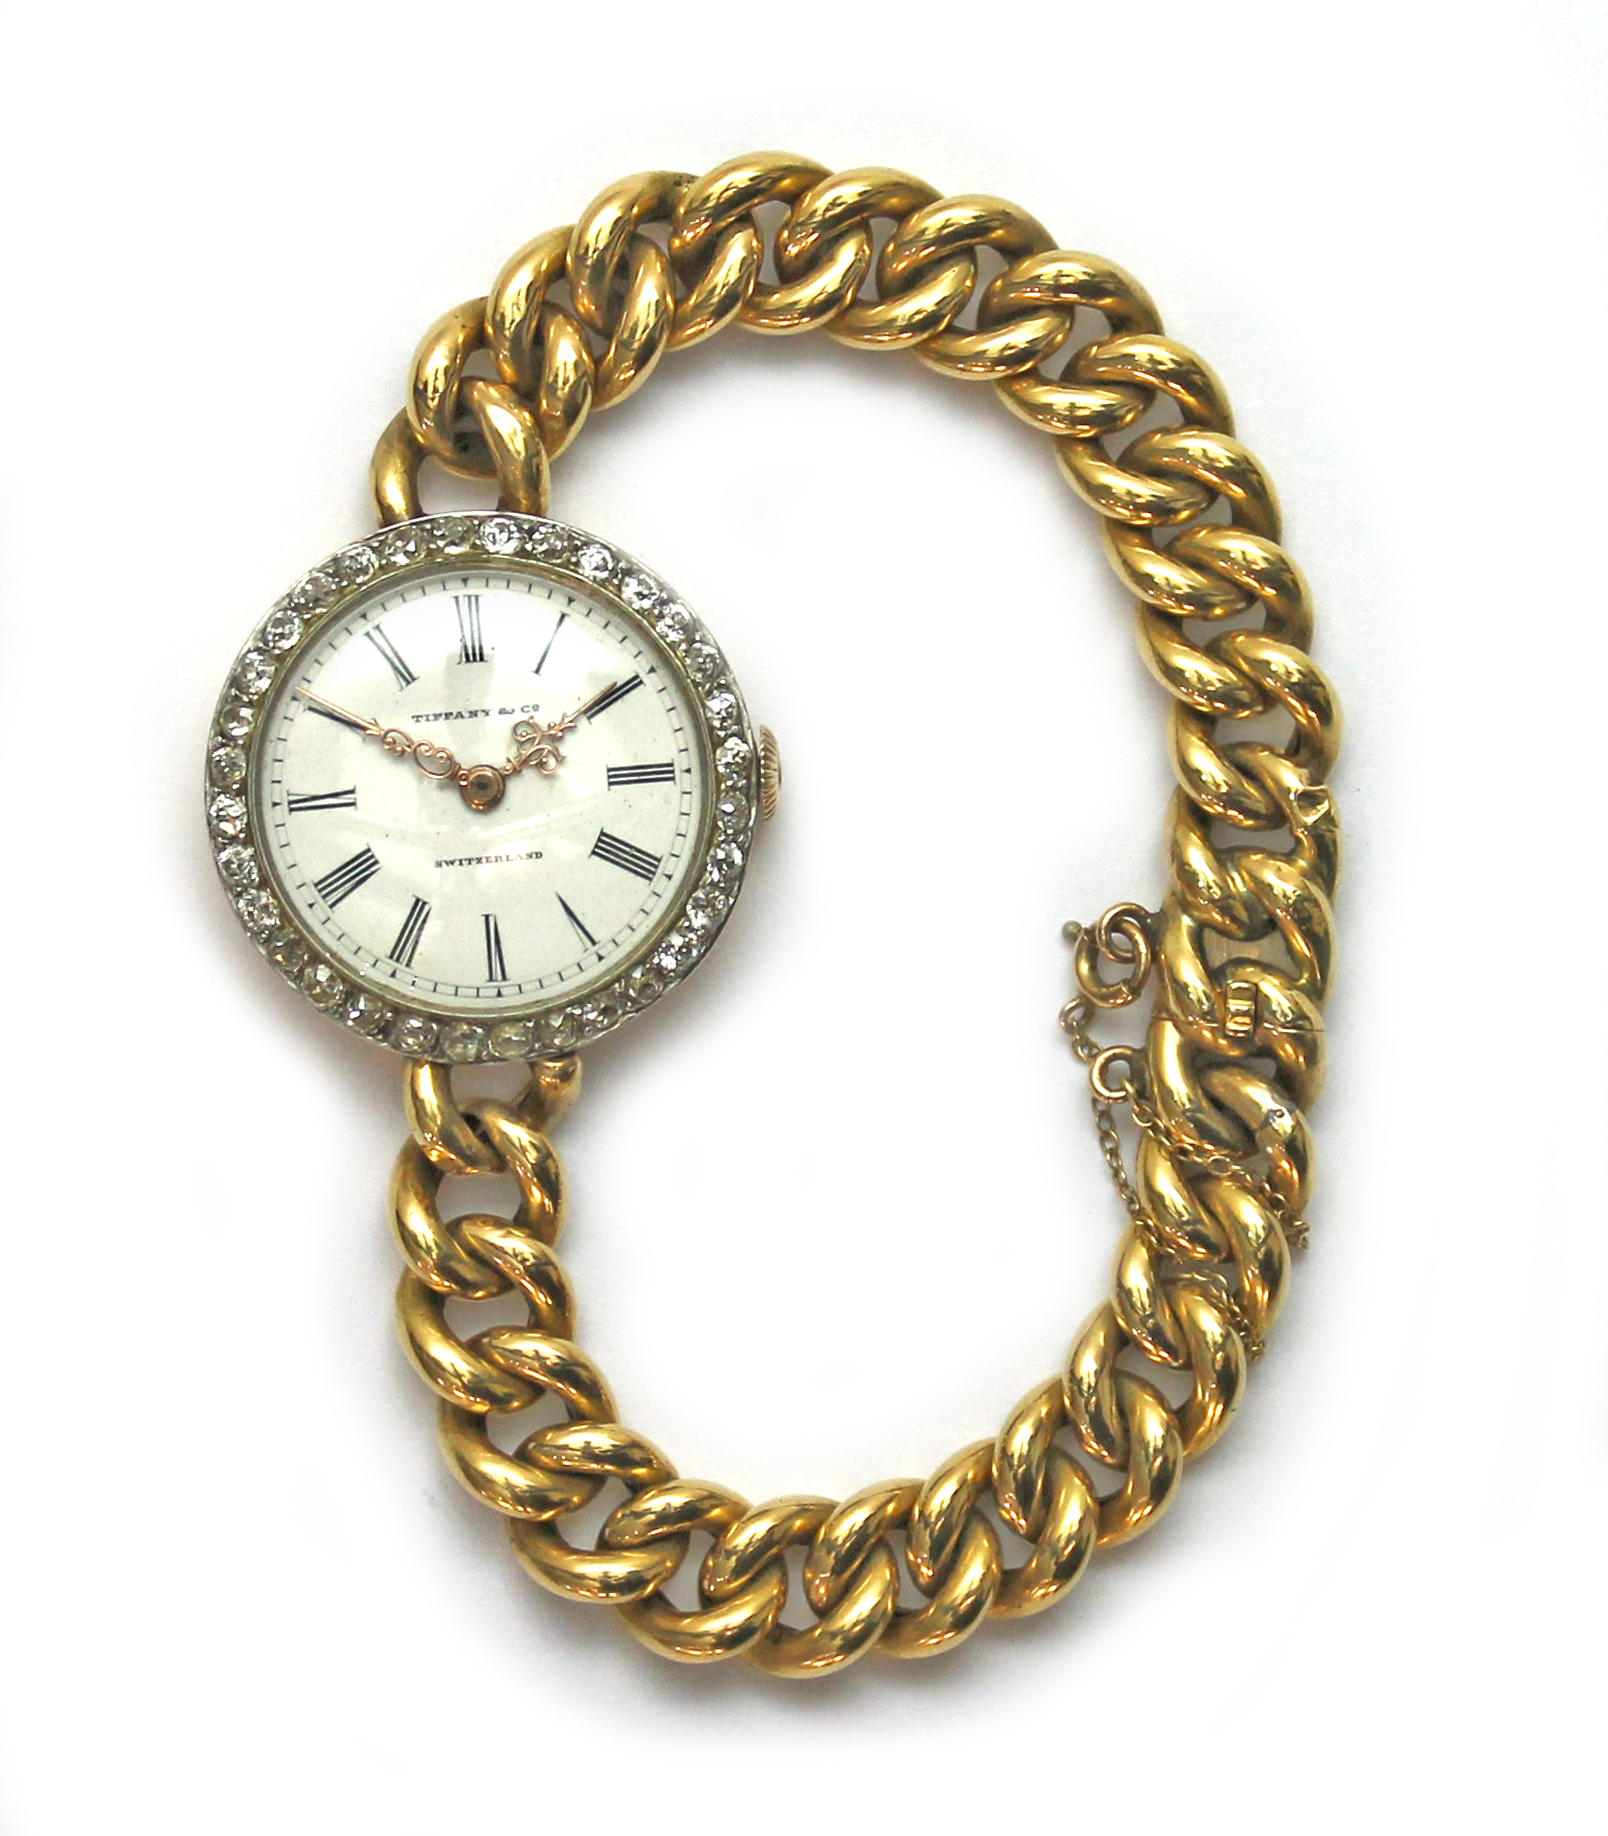 A lady's gold and diamond set Tiffany bracelet wristwatch, the jeweled lever movement detailed